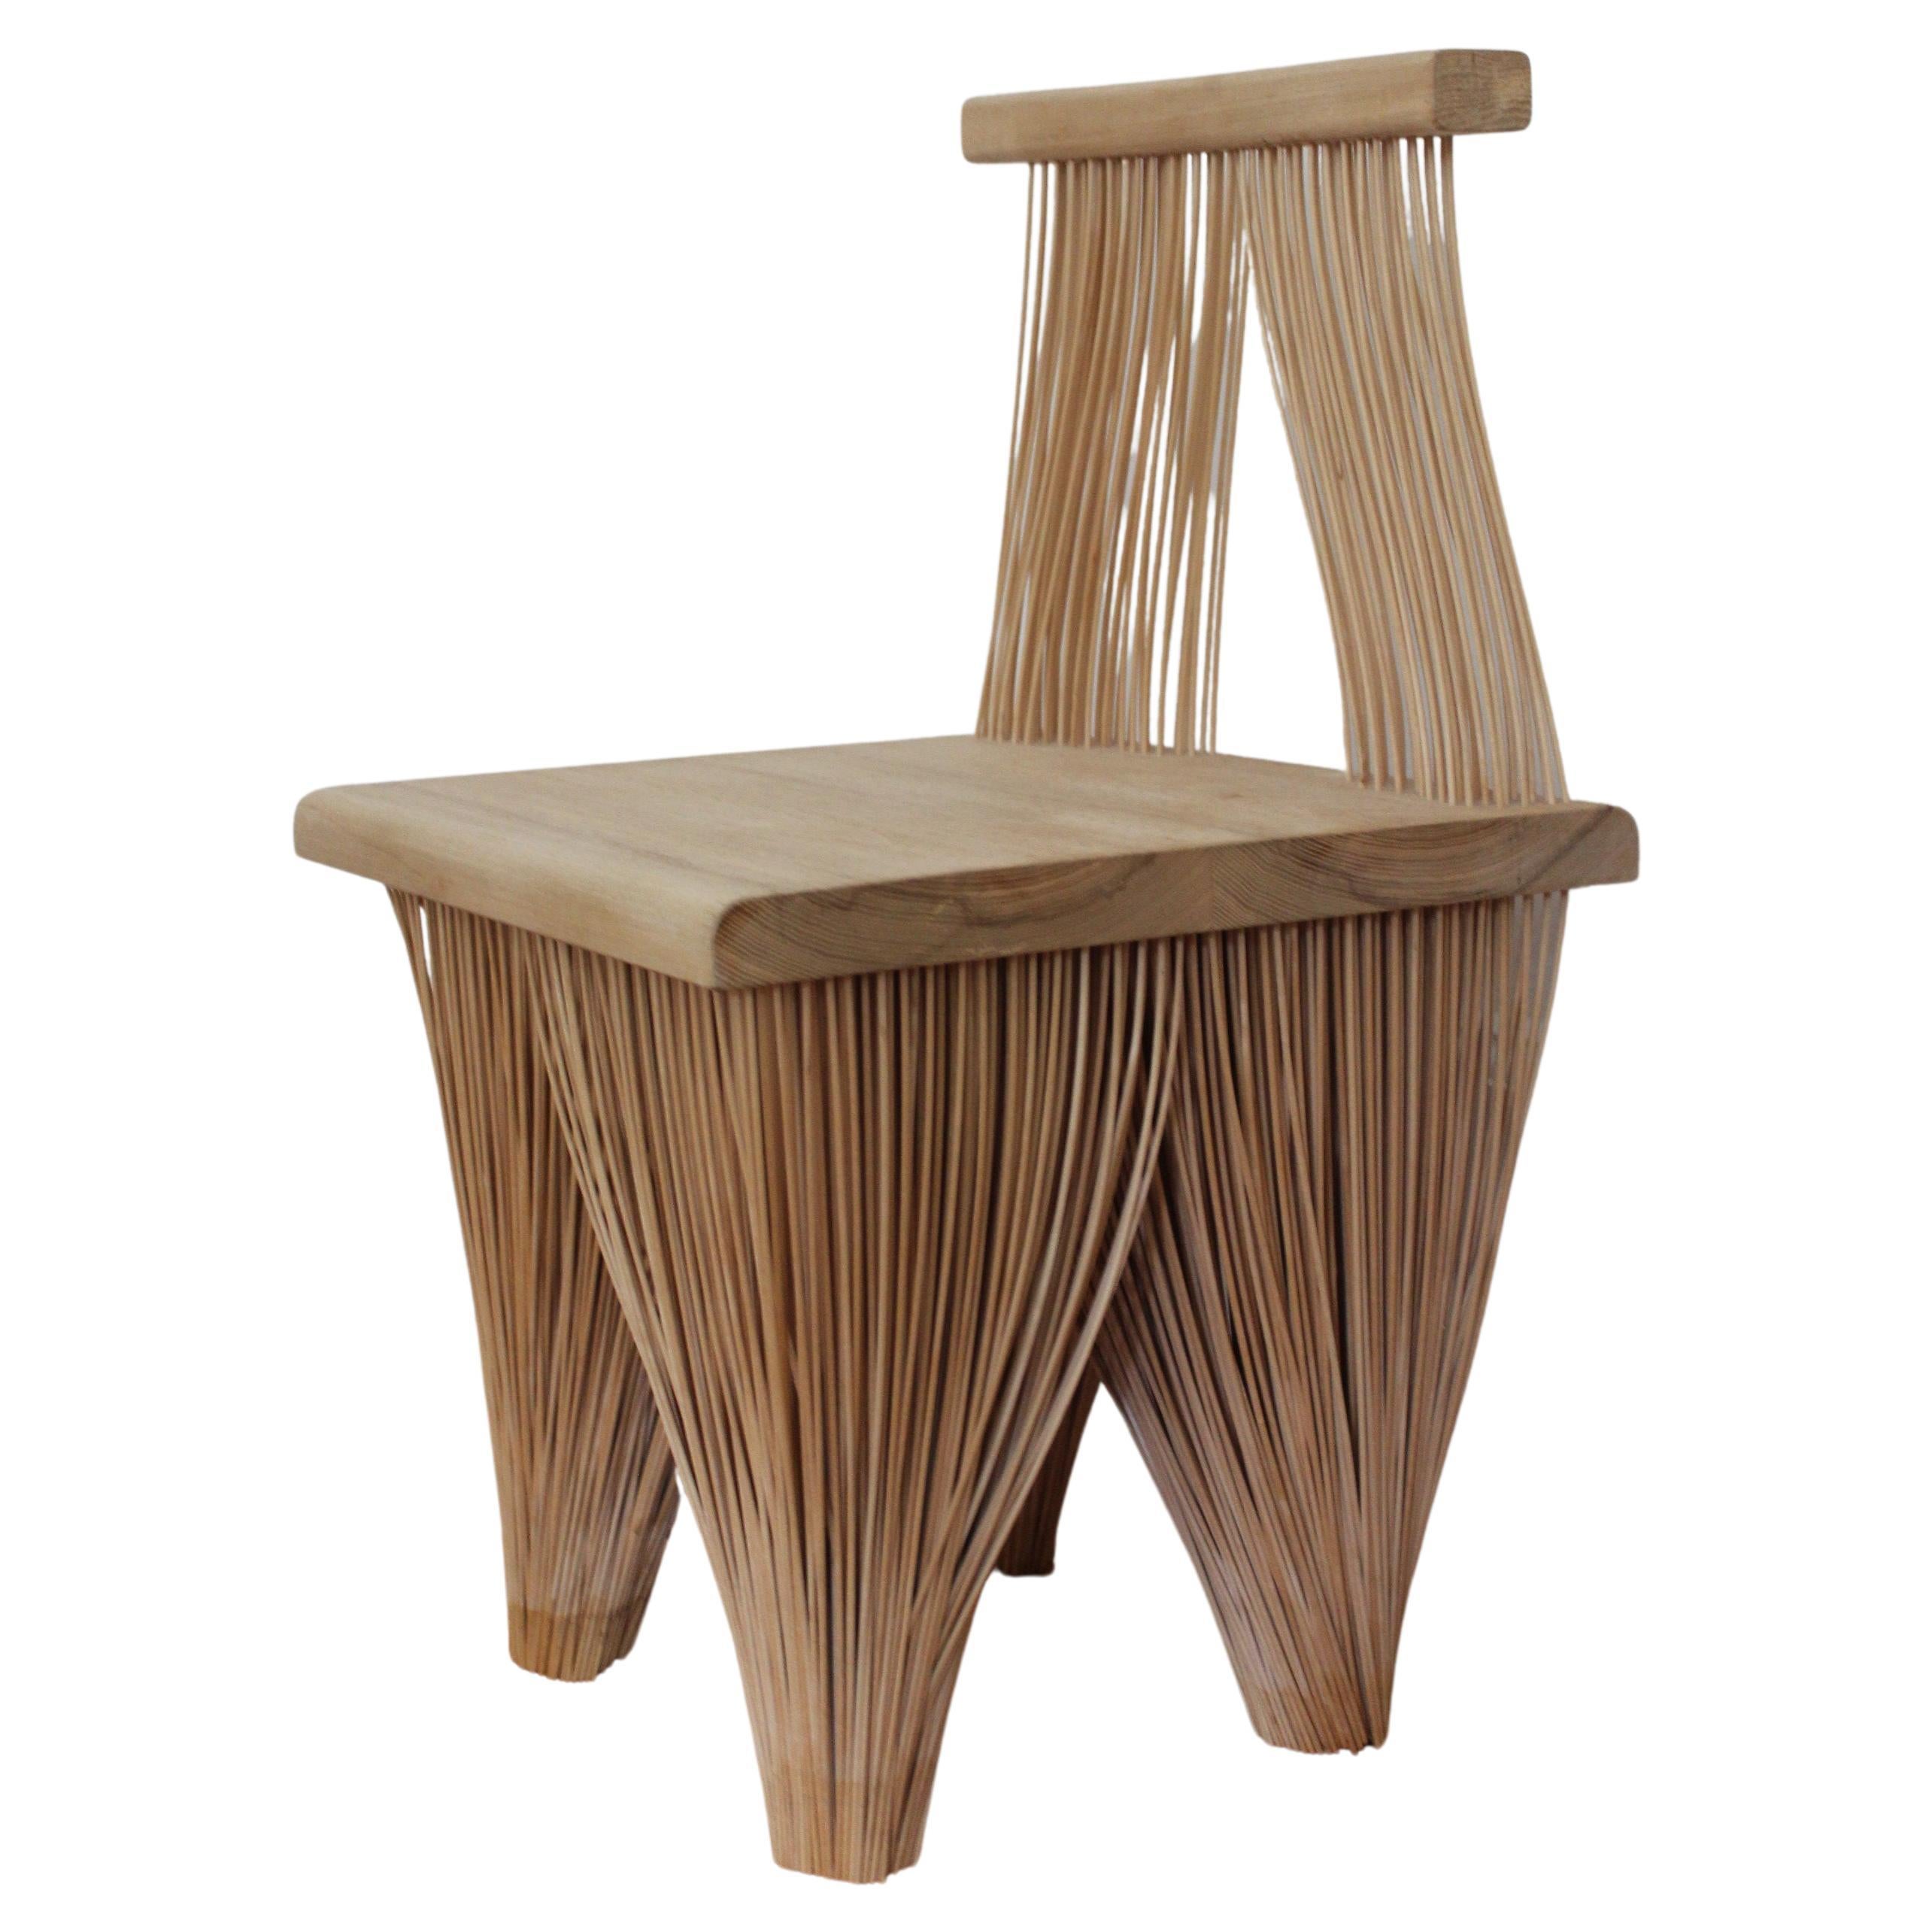 Contemporary Japanese Inspired Wood Hallway Statement Sculptural Chair  For Sale